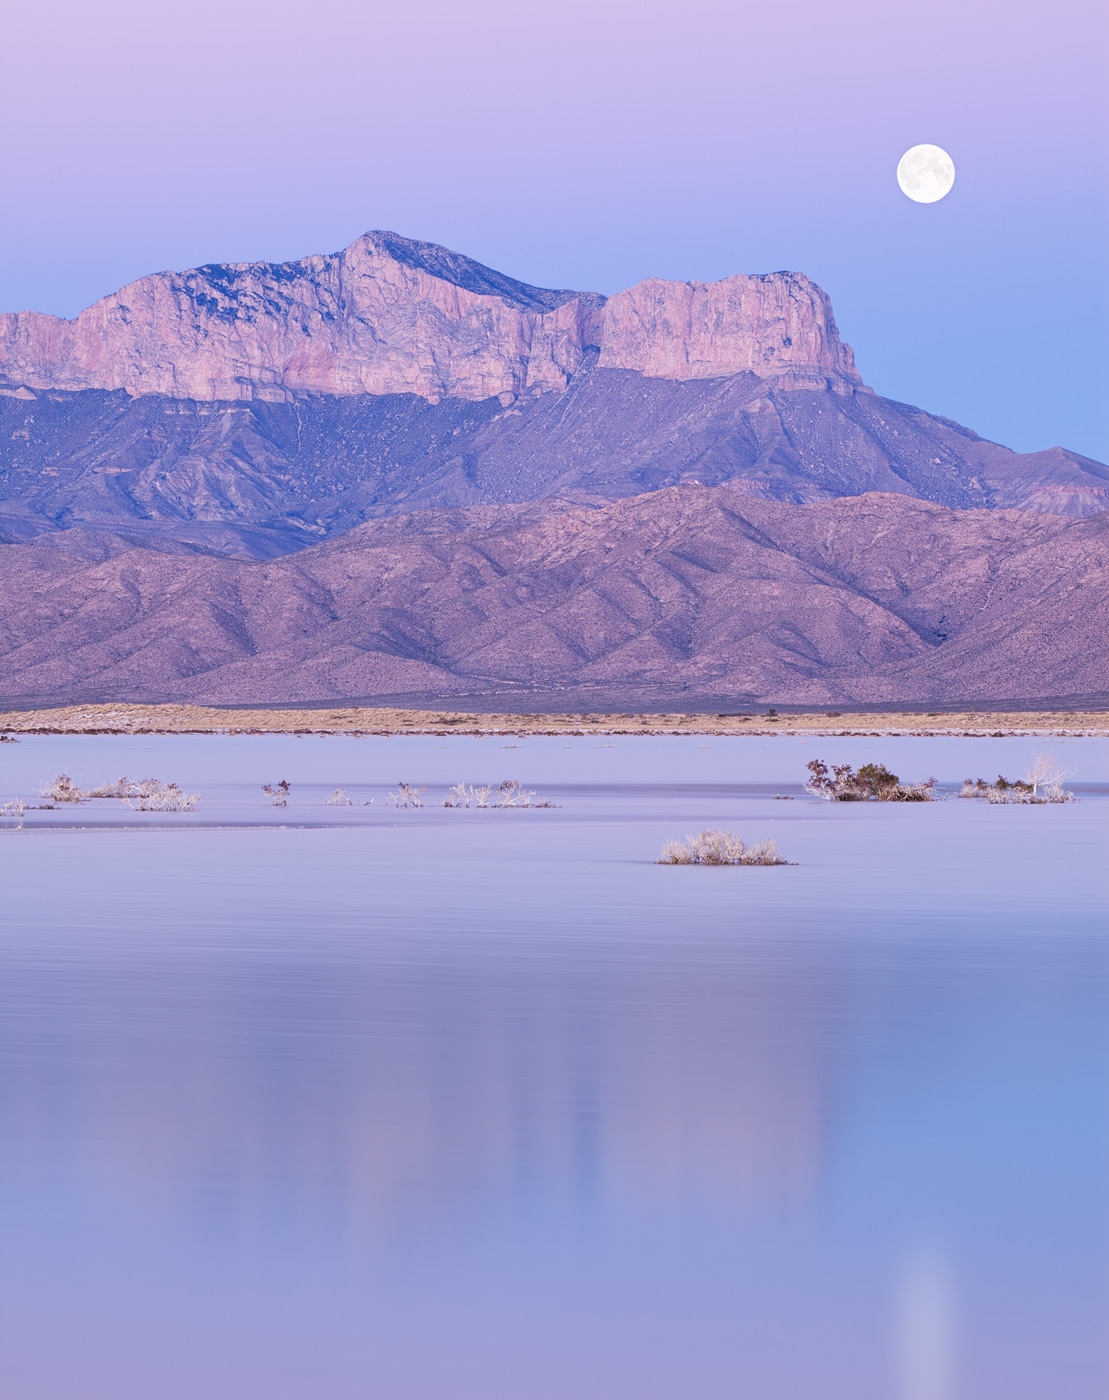 Guadalupe-Mountains-National-Park-ABP-Guadalupe-Mountains_Salt-Flat-Lake.jpg